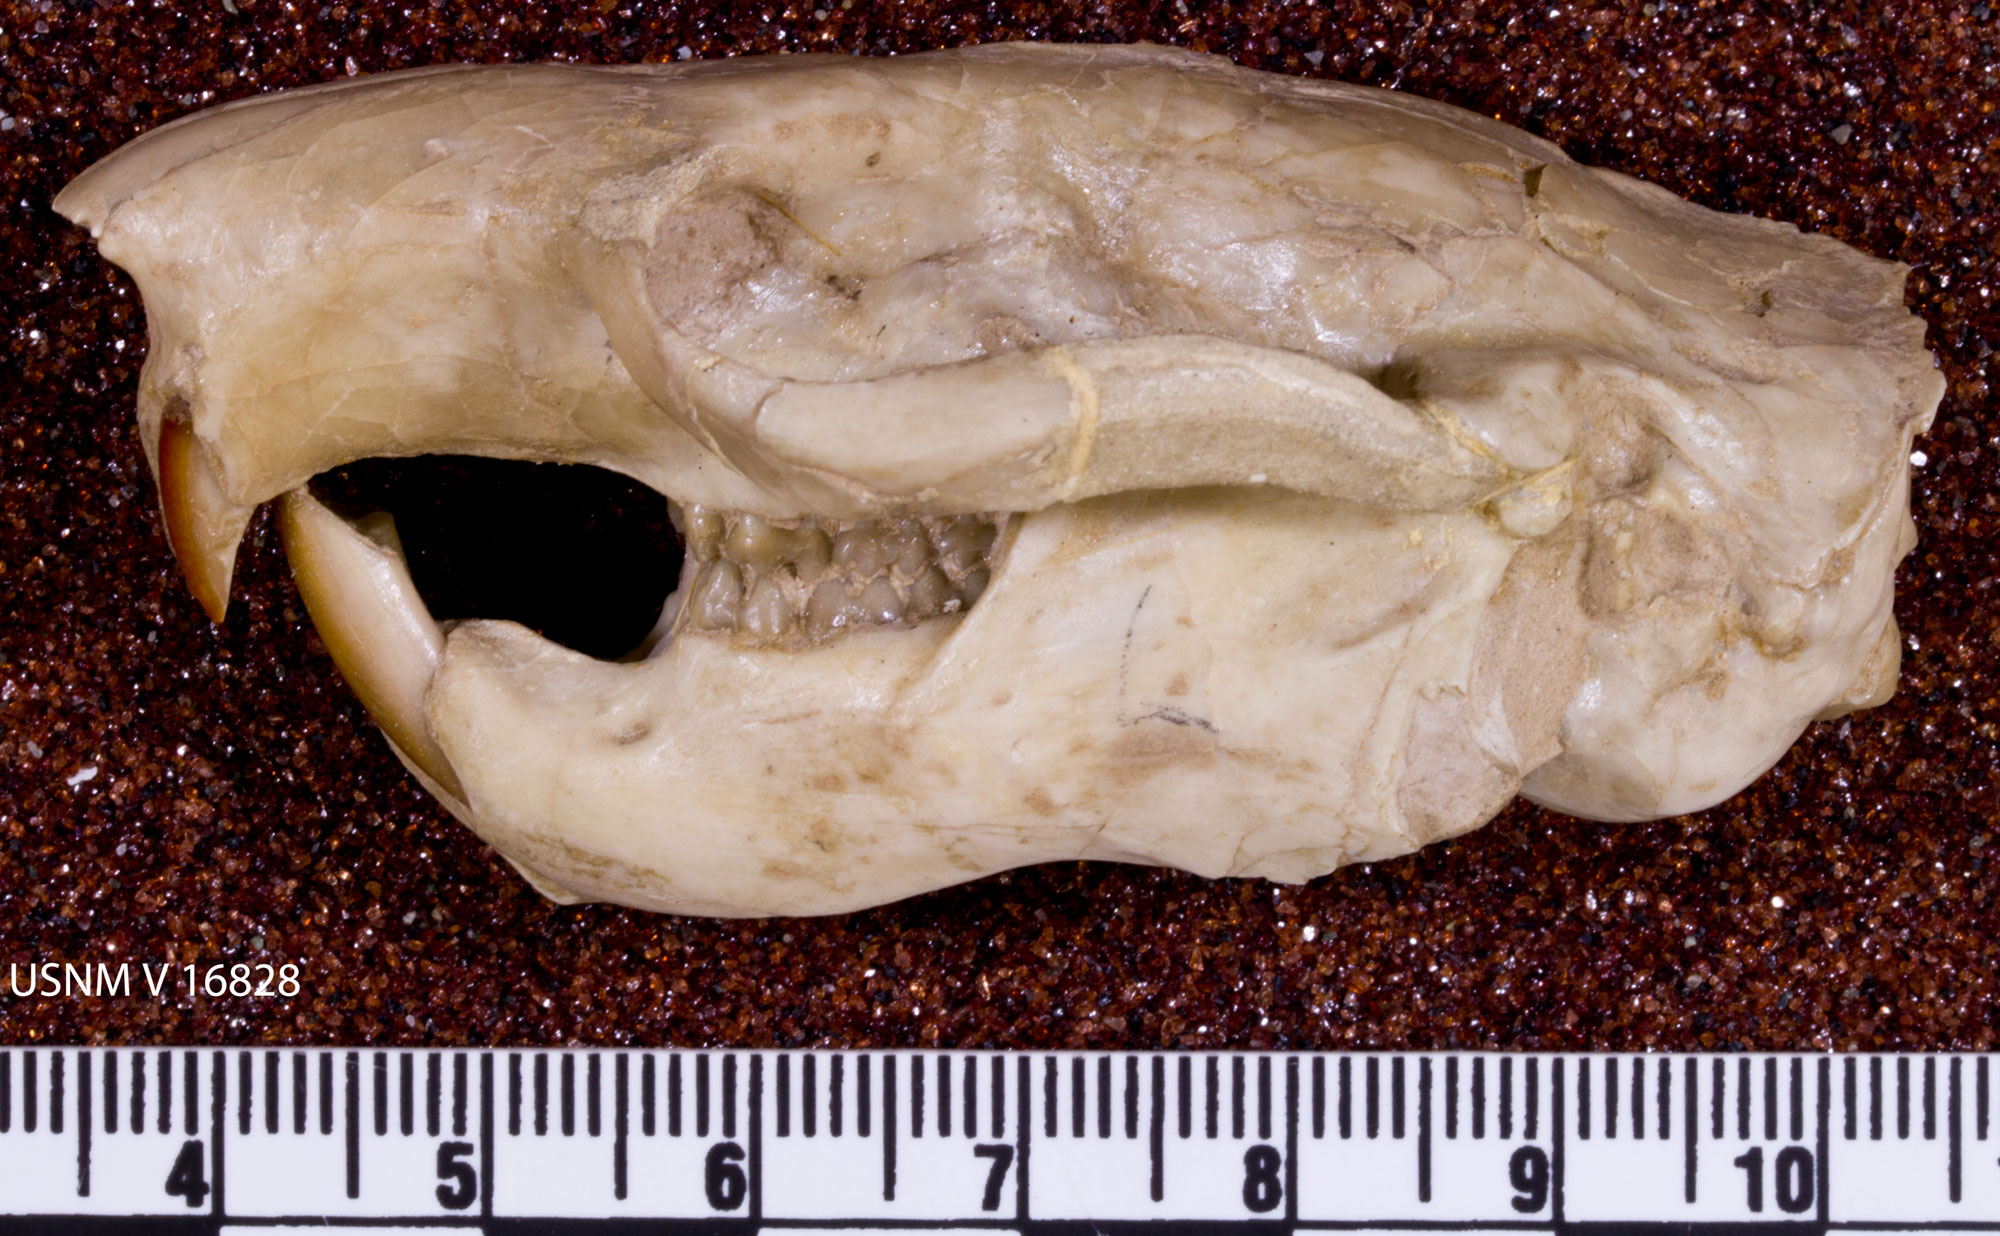 Photograph of a fossil rodent skull from the Oligocene White River Group of Wyoming. The photo shows the skull is side view, with the nose pointed to the left. The skull has the large upper and lower incisors characteristic of a rodent. The total length of the skull is about 7 centimeters, as indicated by a metric ruler at the bottom of the image.